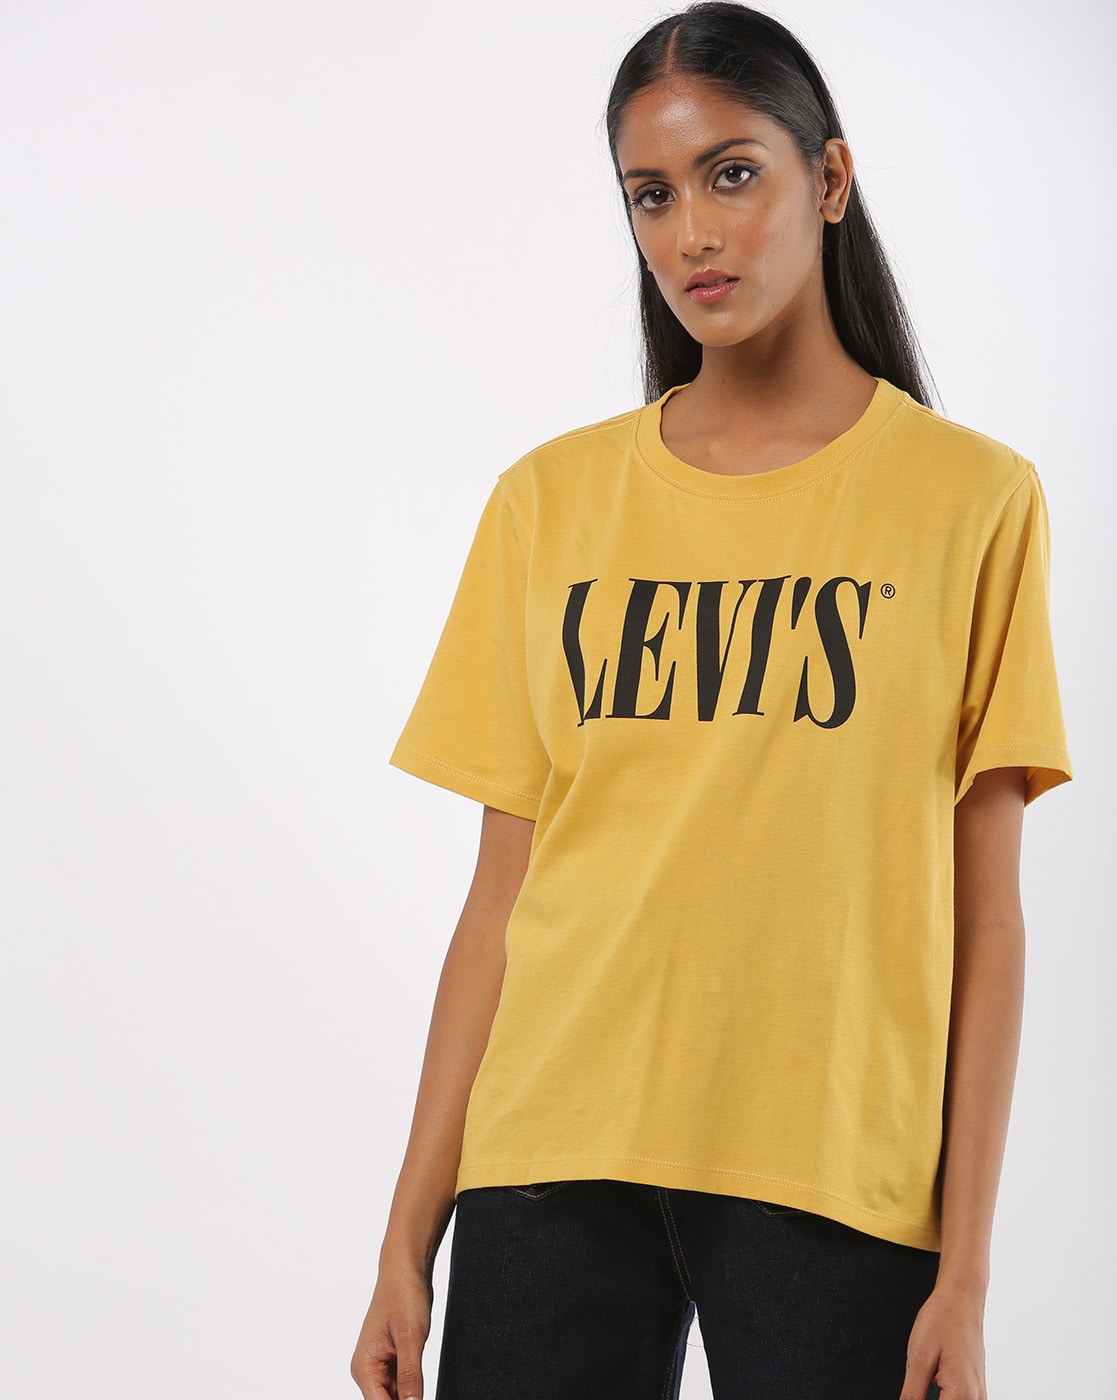 Buy Mustard Yellow Tshirts for Women by 